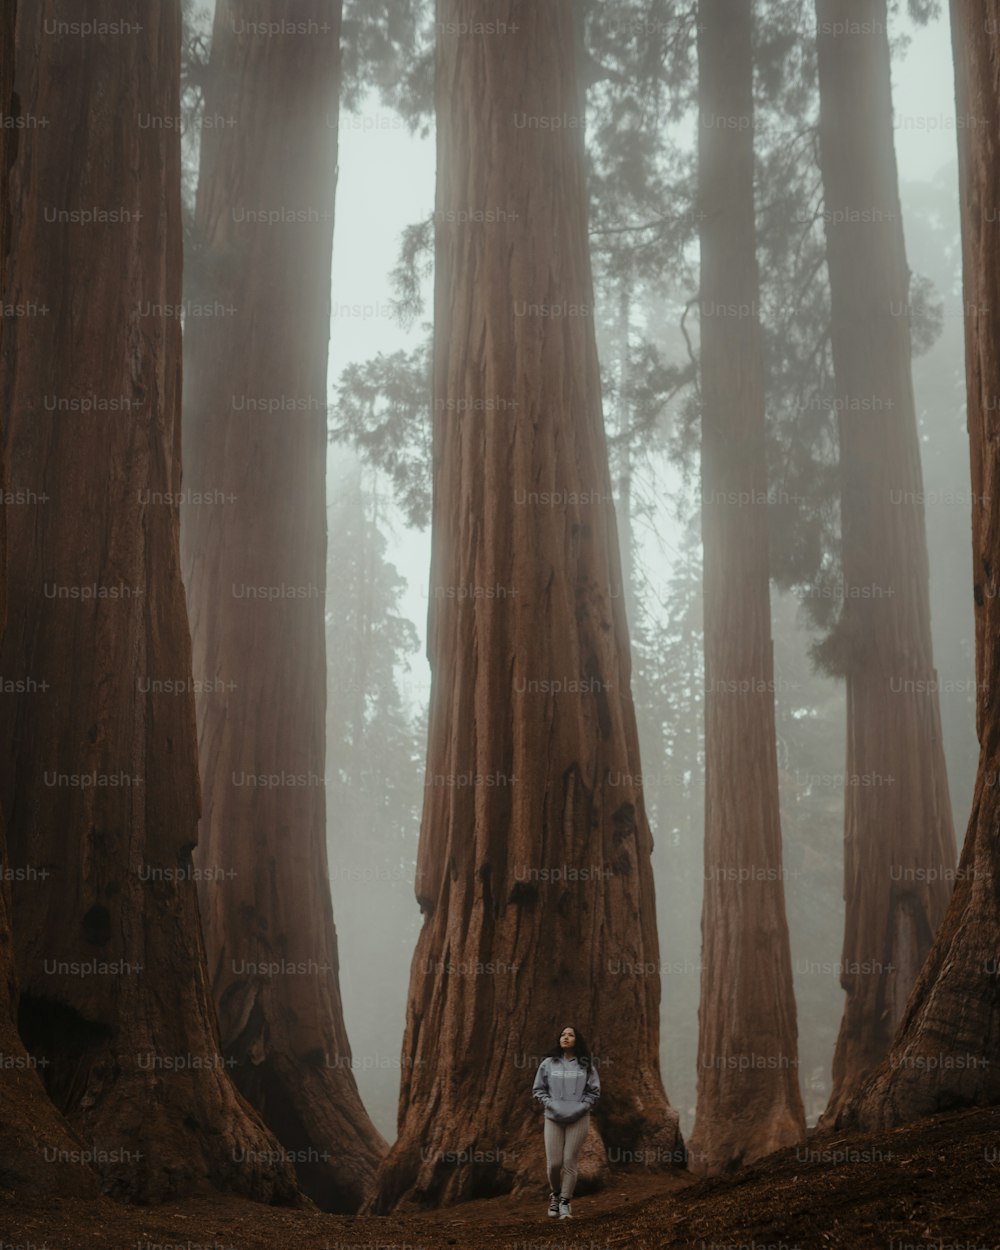 a person walking through a forest filled with tall trees